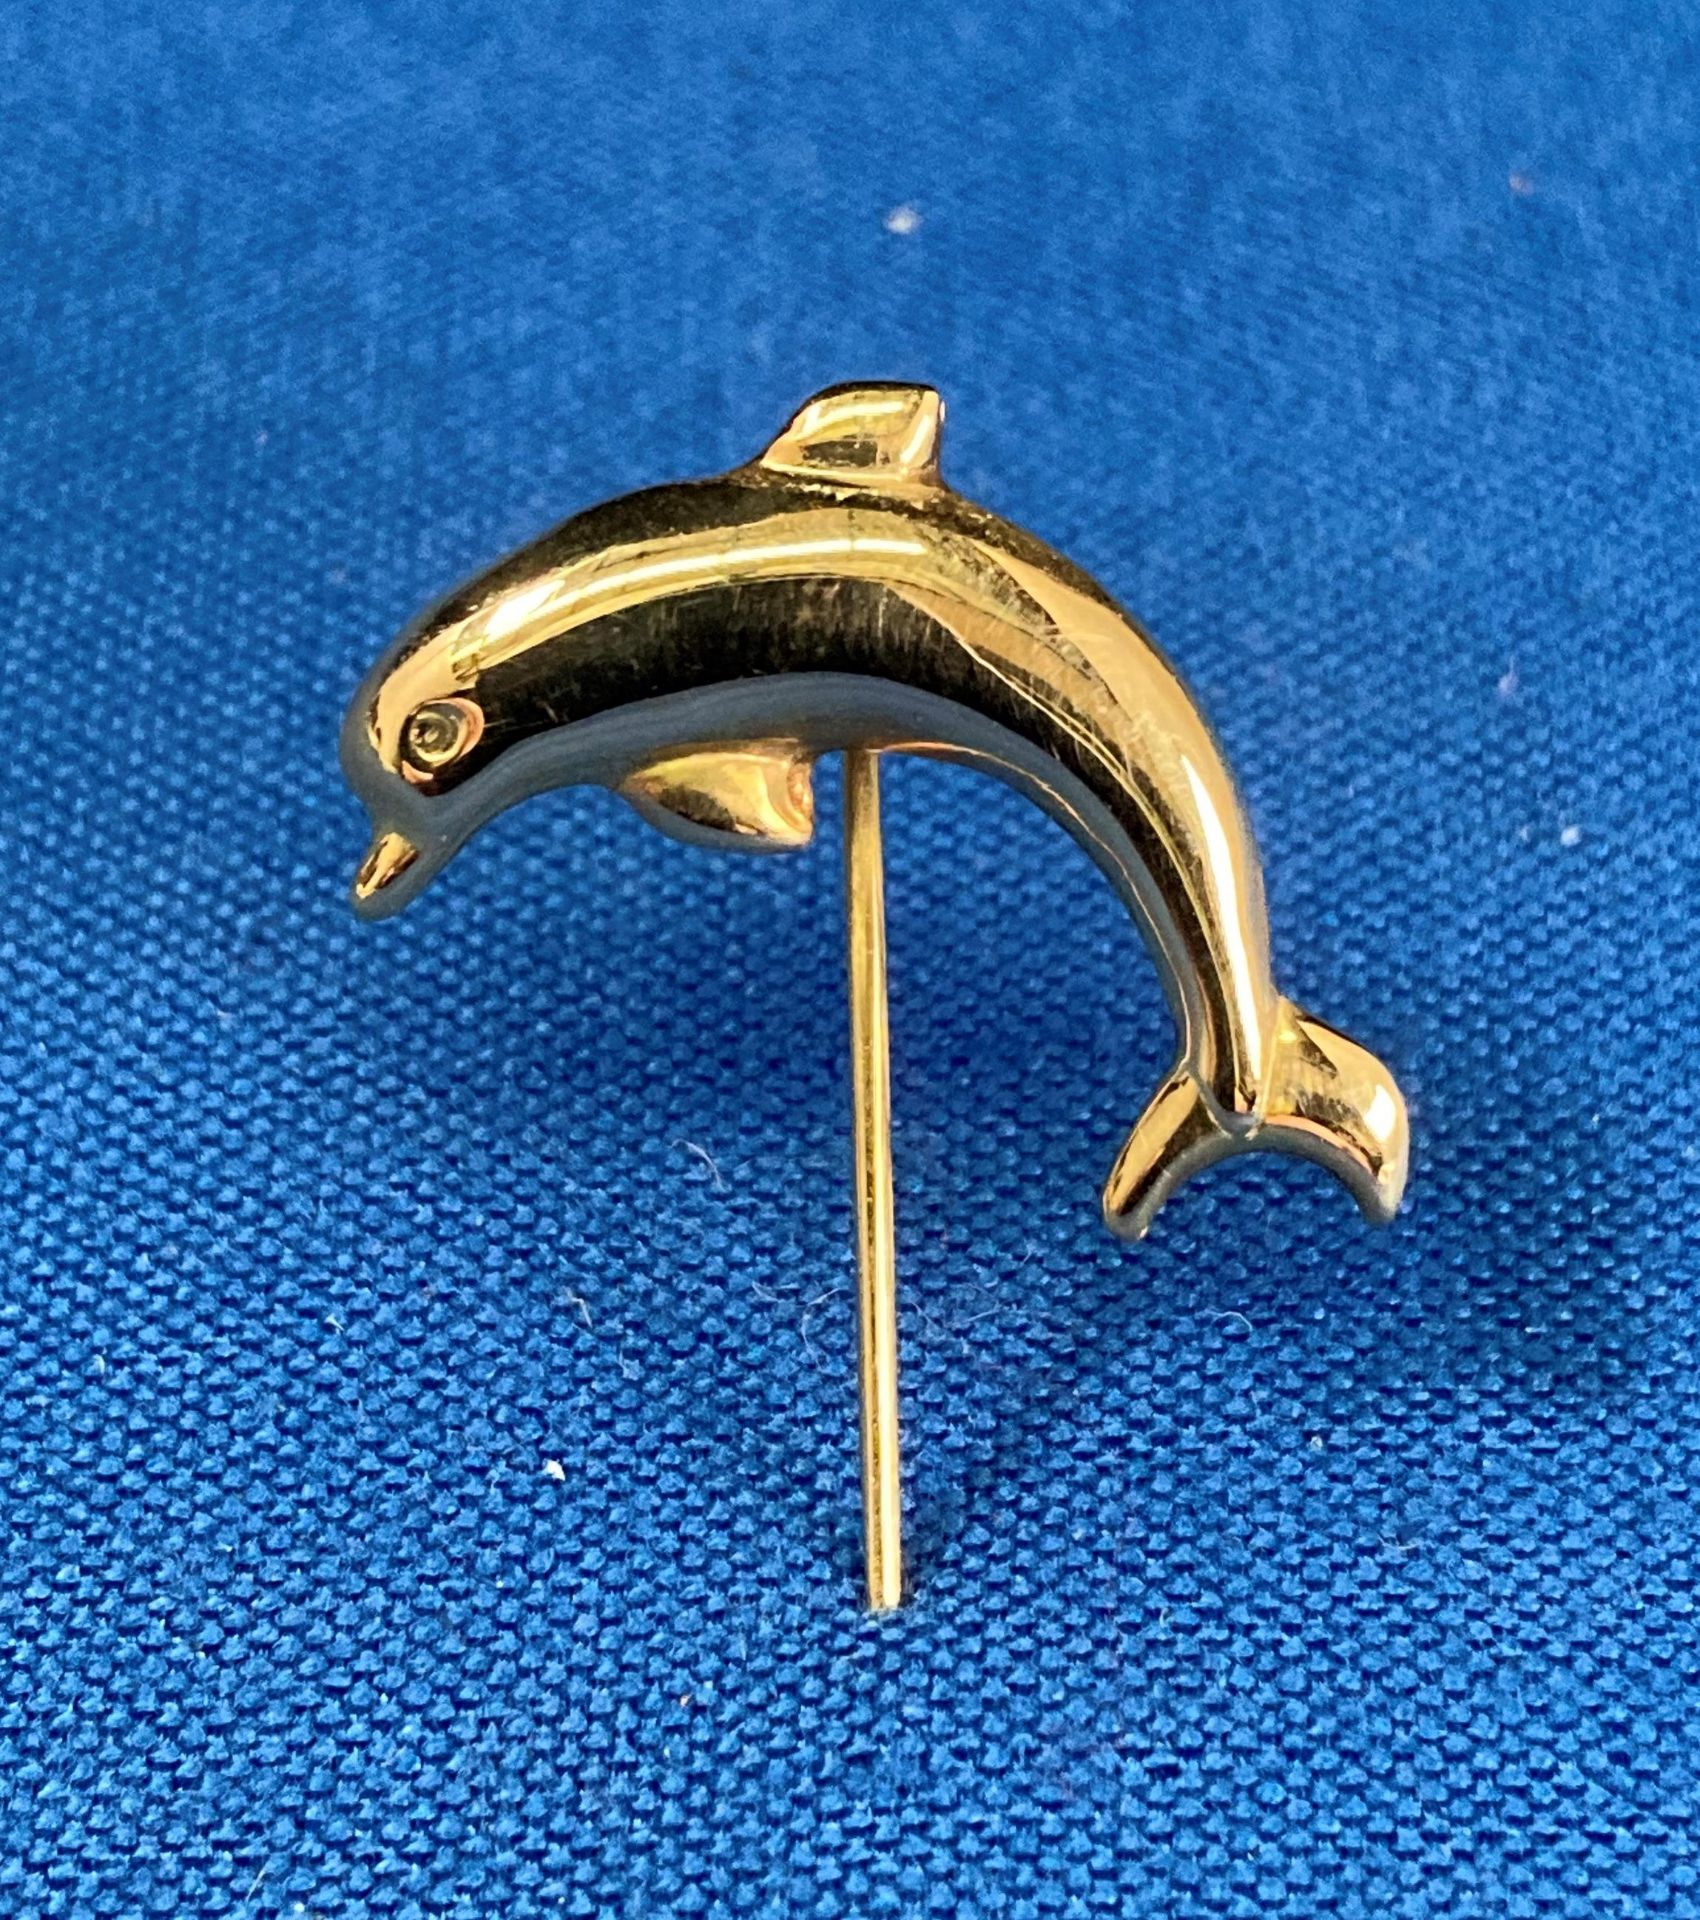 14ct gold (585) dolphin pin brooch/tie pin. Weight: 1.